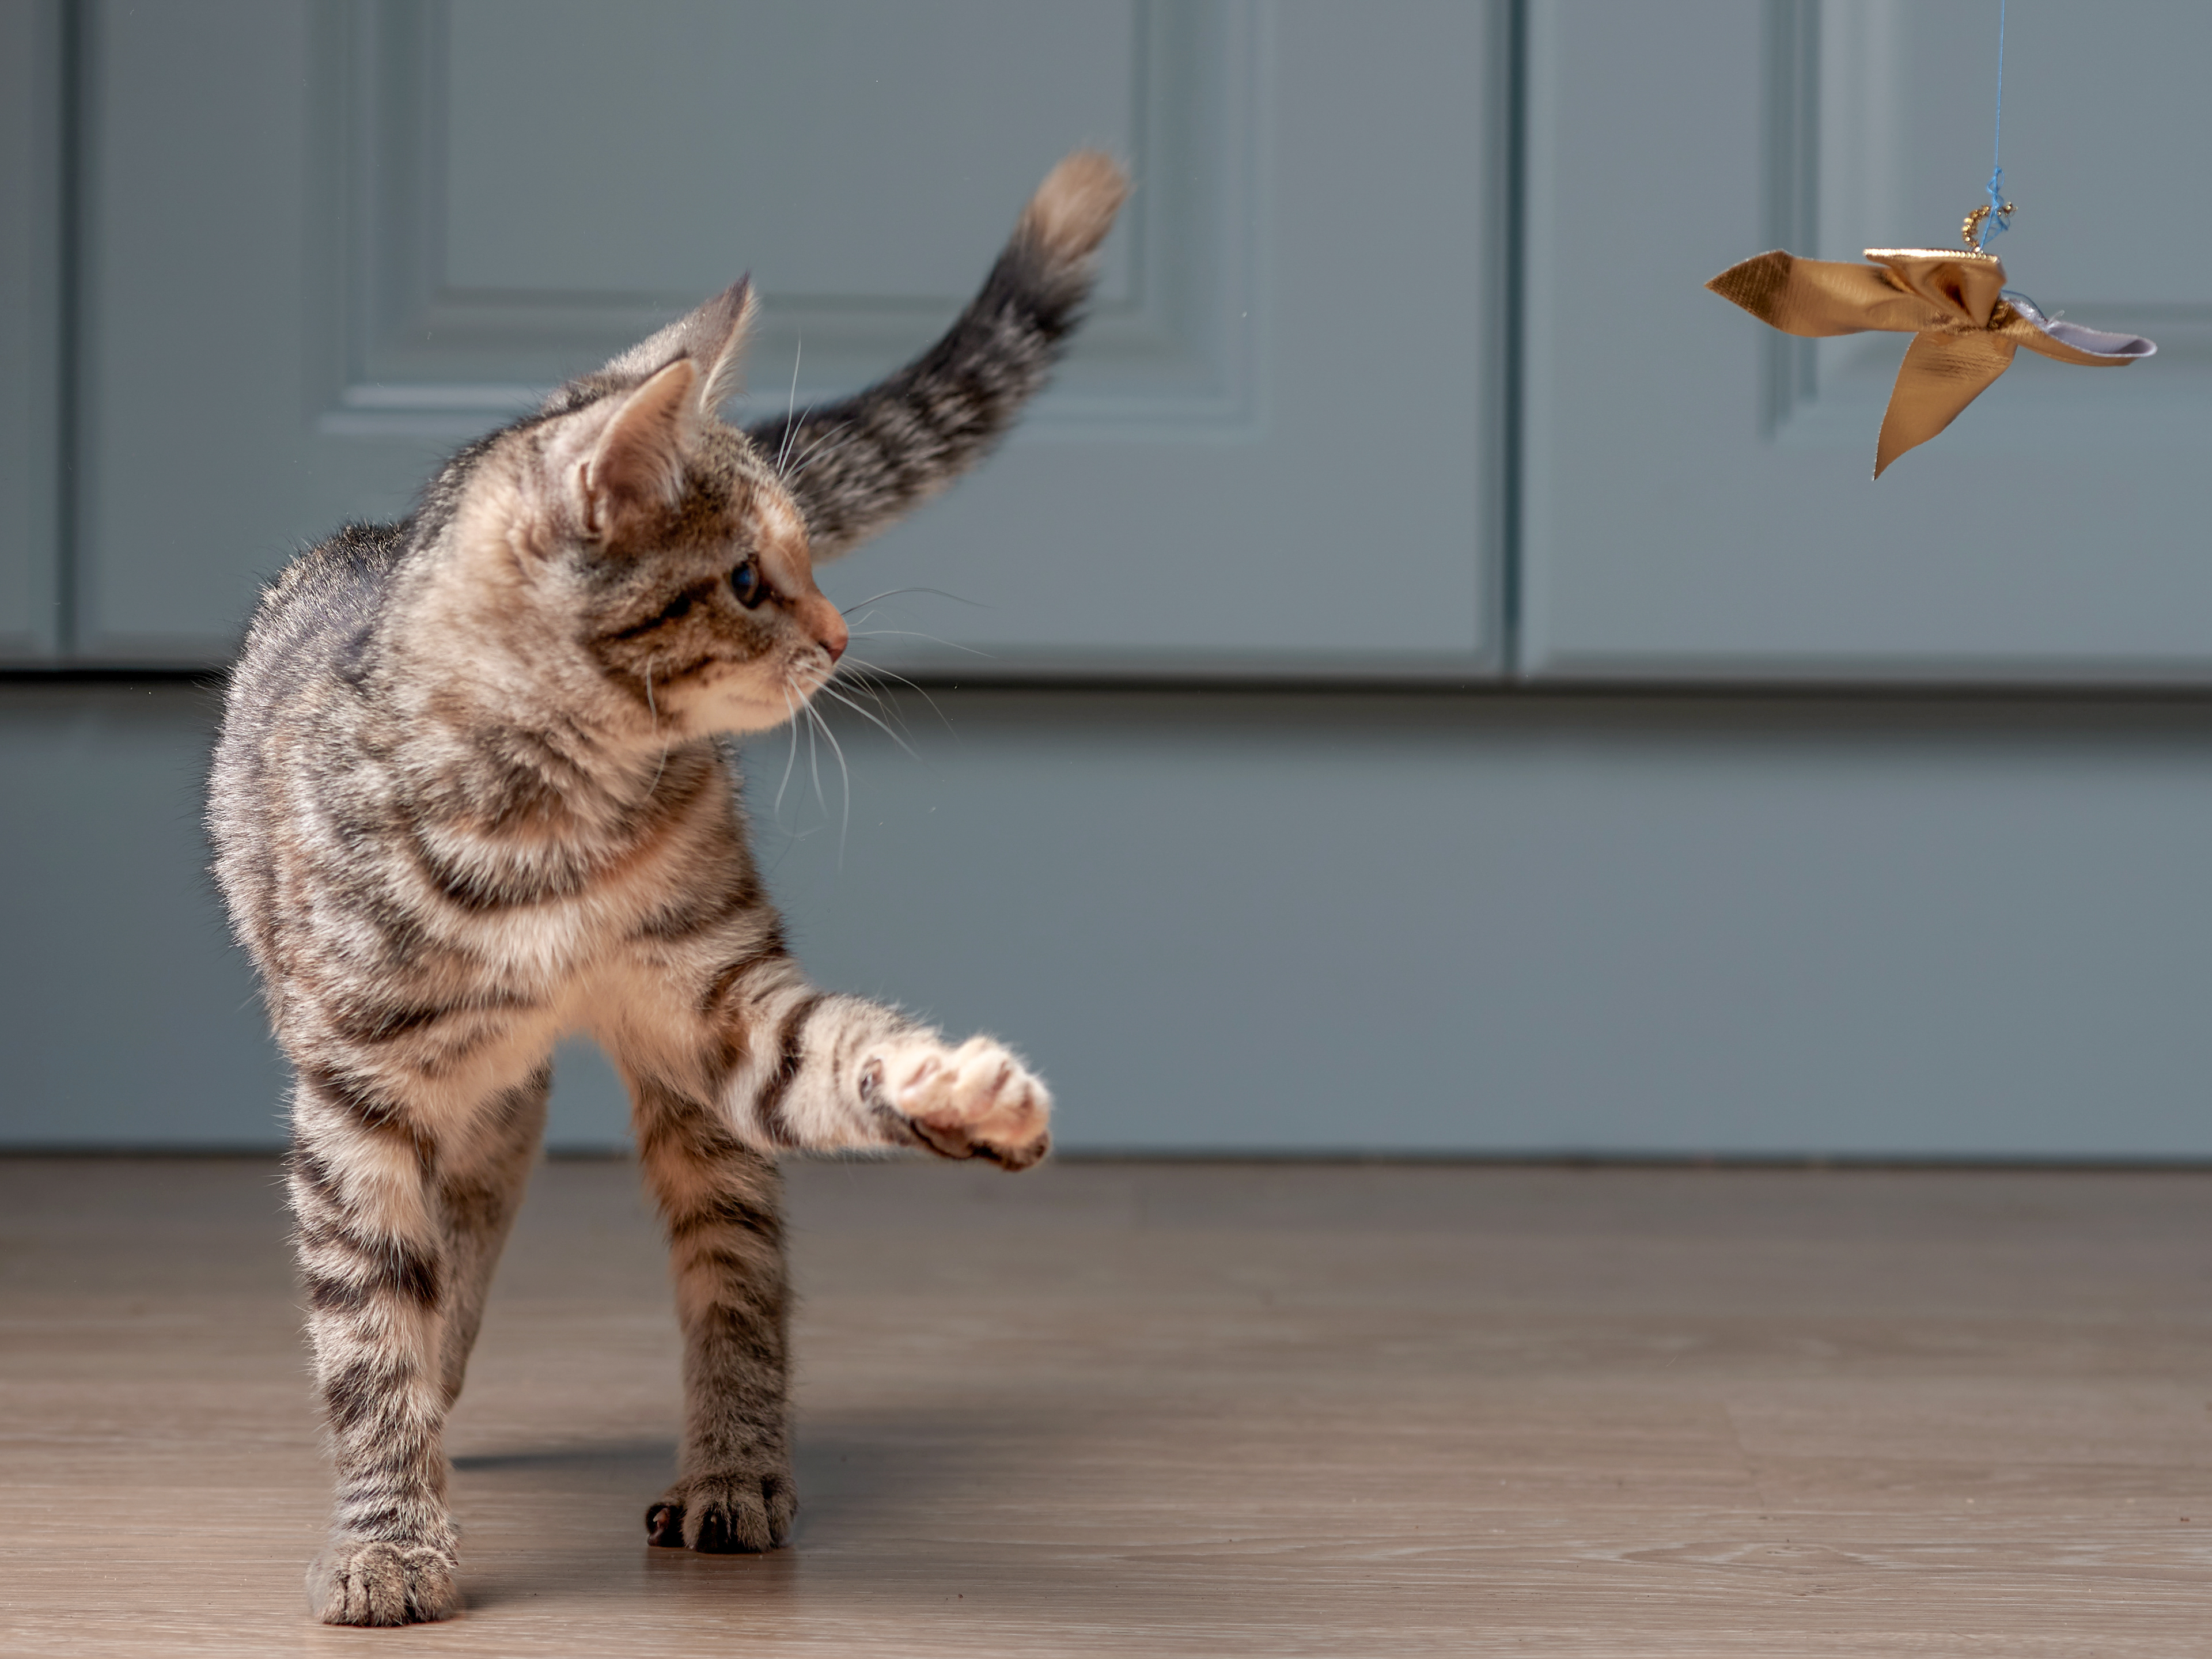 Tabby kitten playing in a kitchen with a ribbon on string